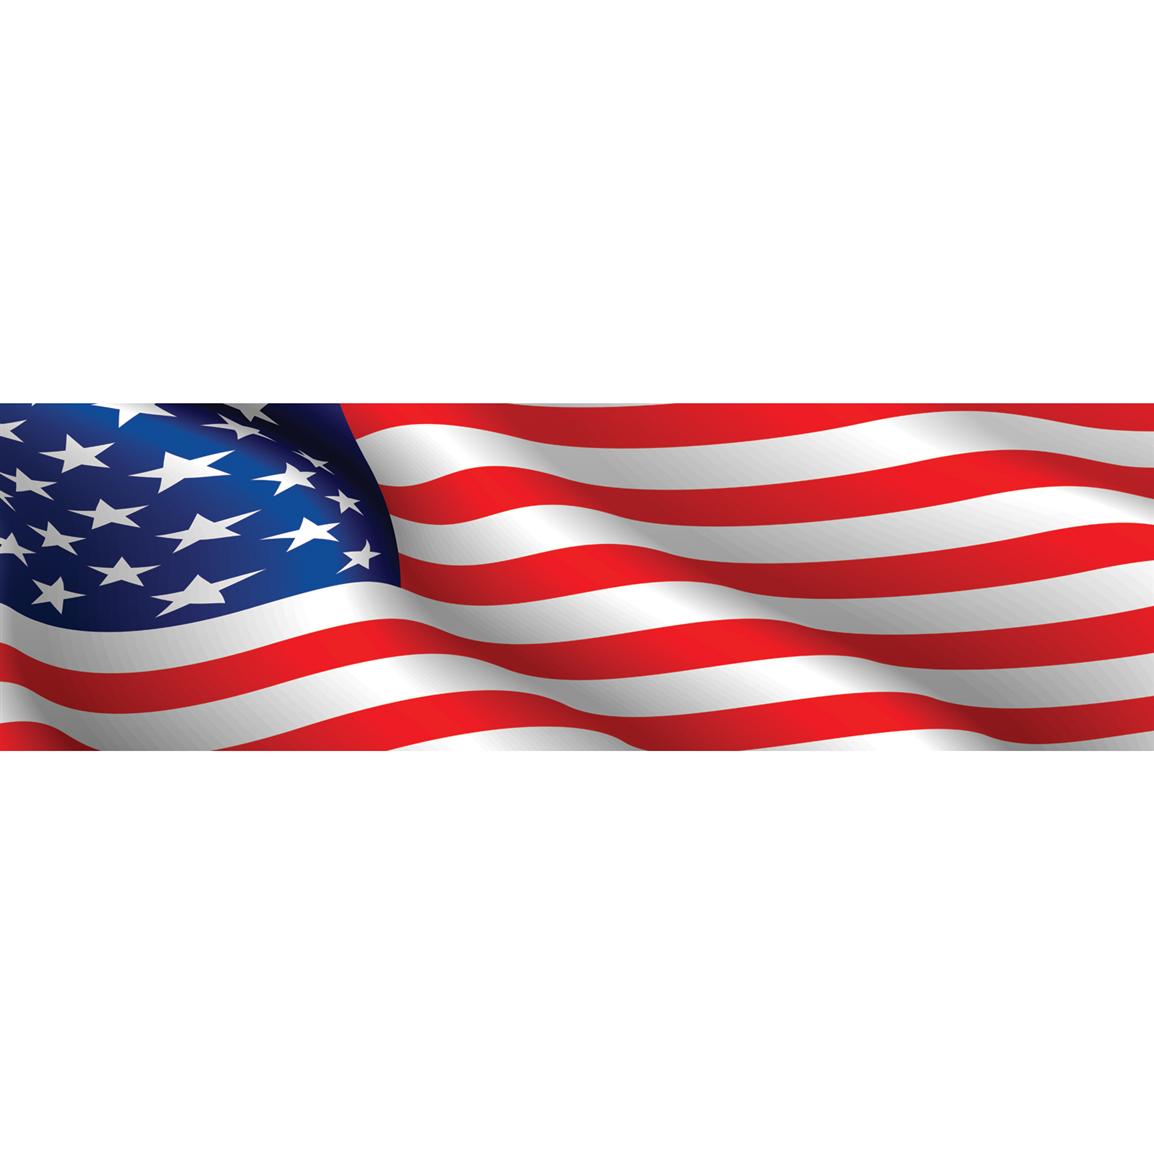 American Flag Image - Clipart library